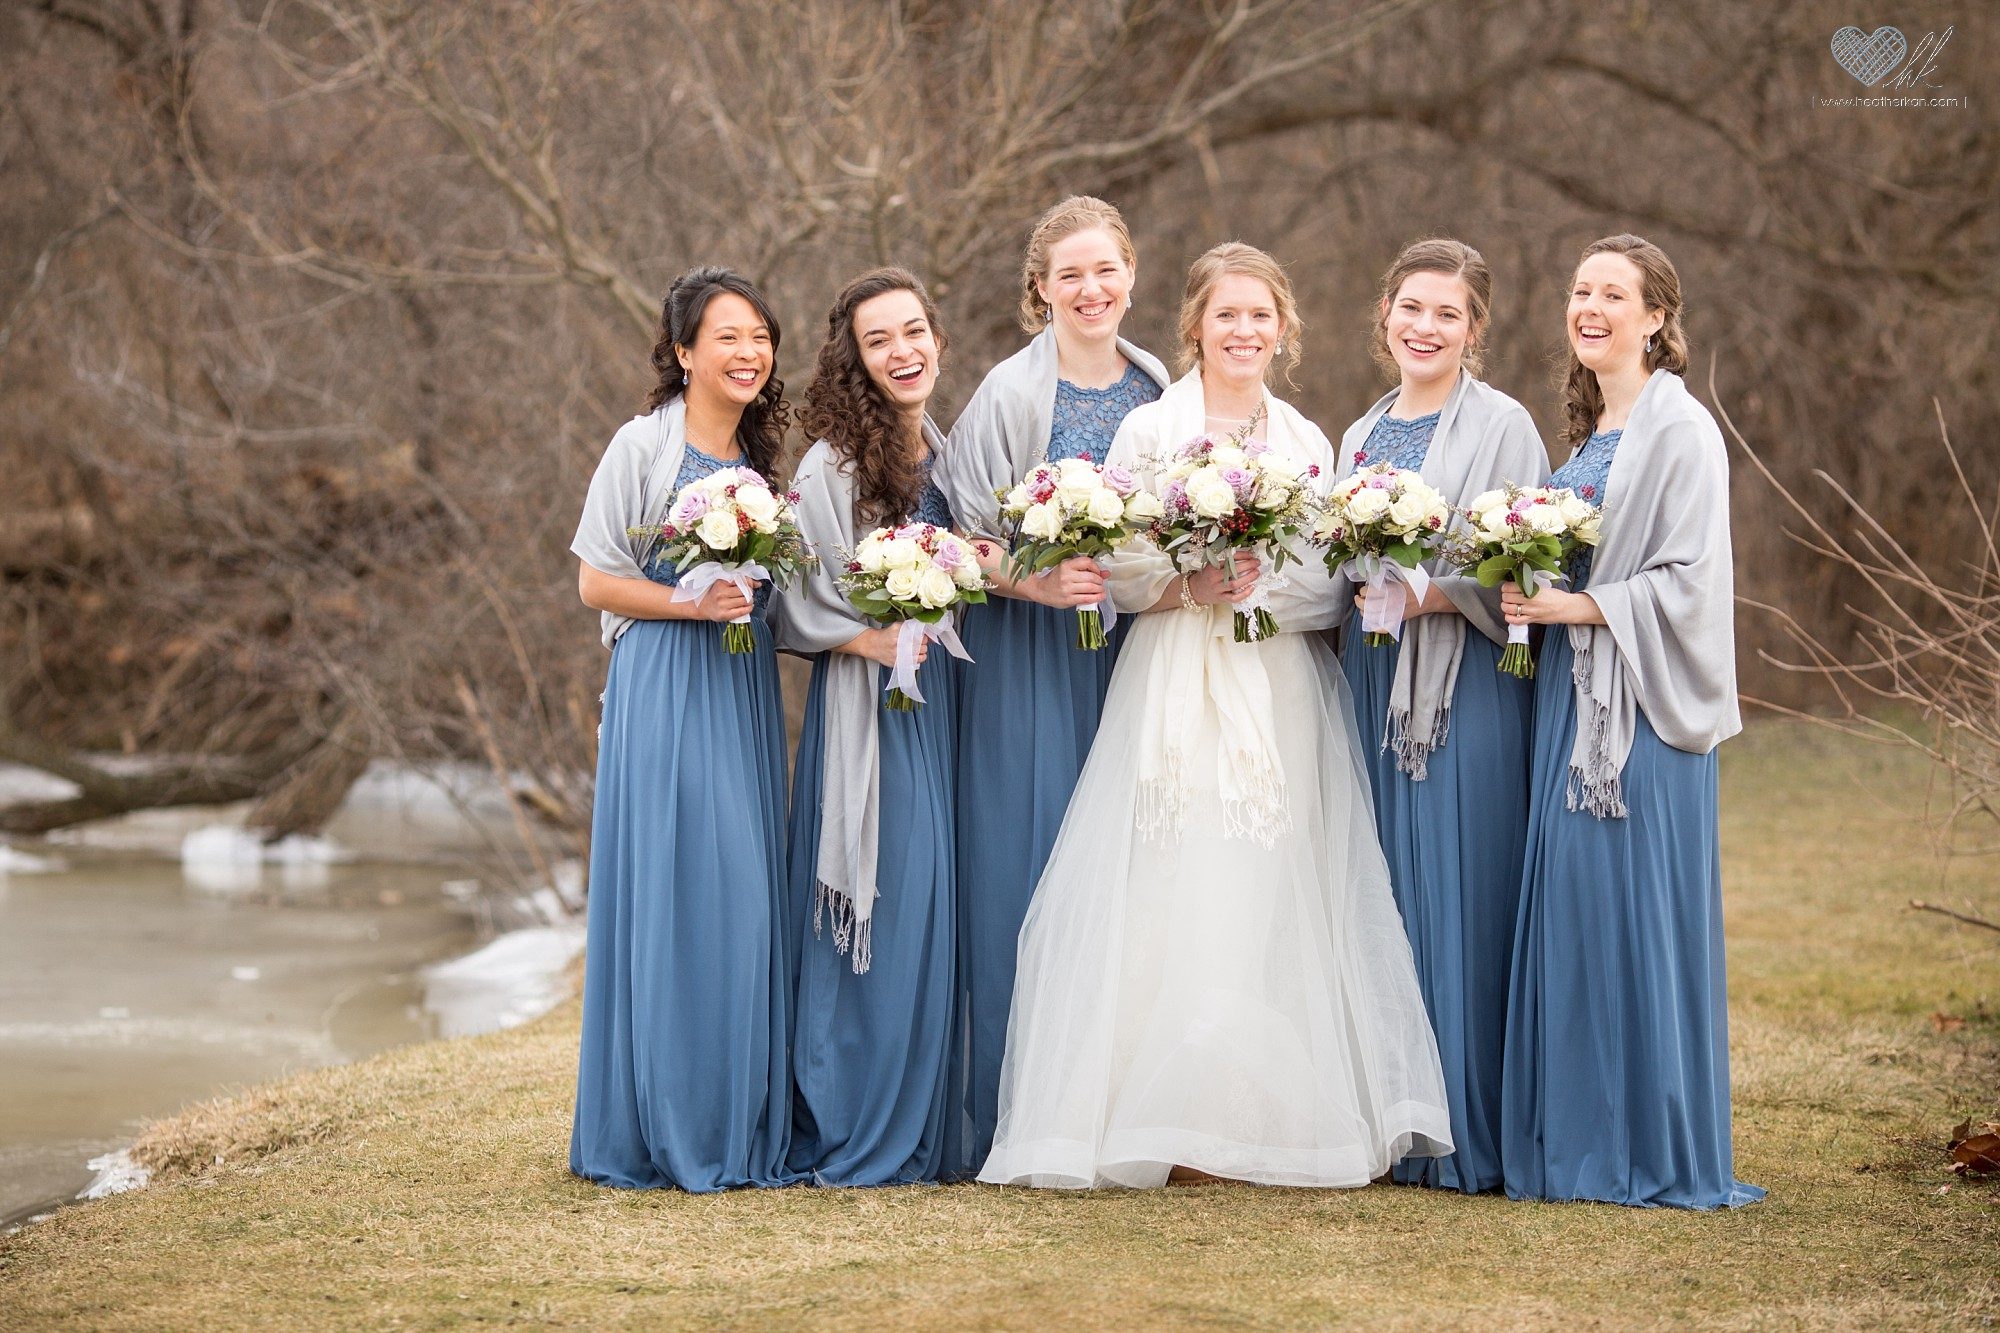 Bridal party wedding photographs in Plymouth, Michigan